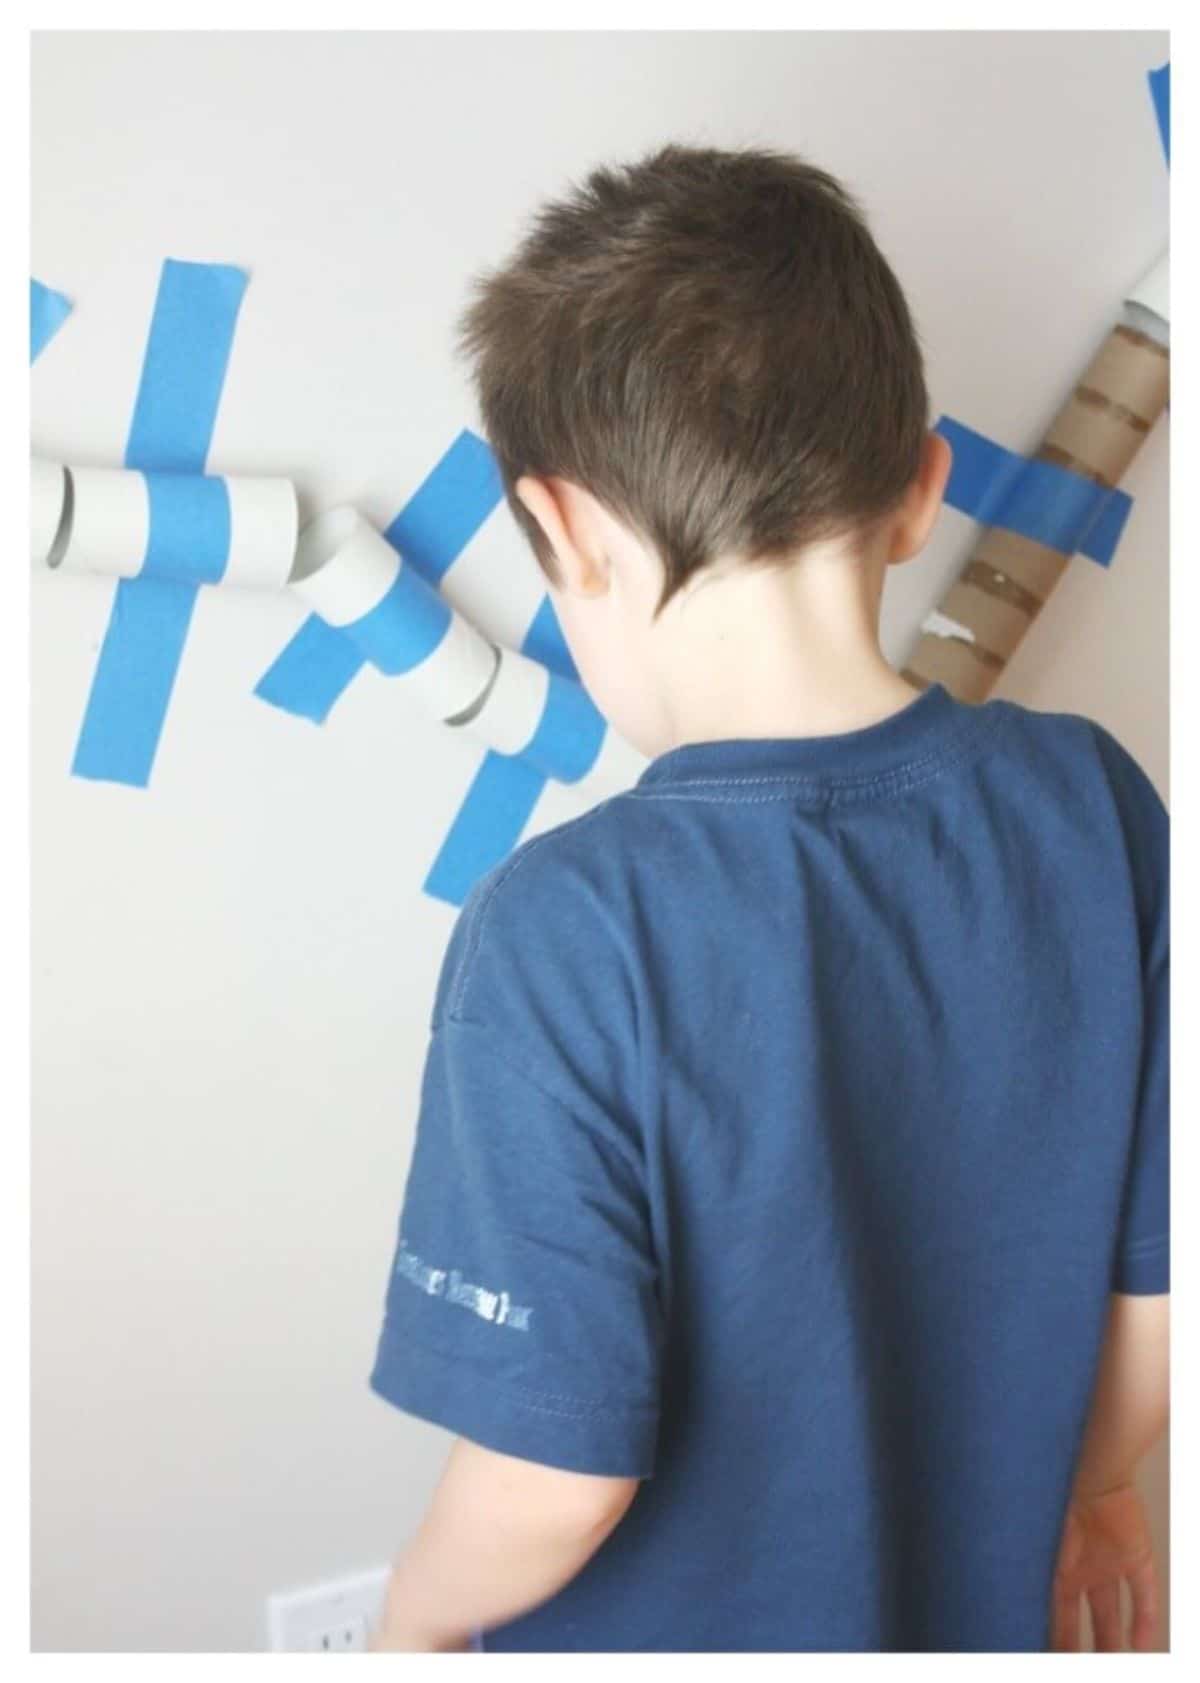 A boy in a blue shirt stands in front of a wall that has toilet roll tibes taped to it